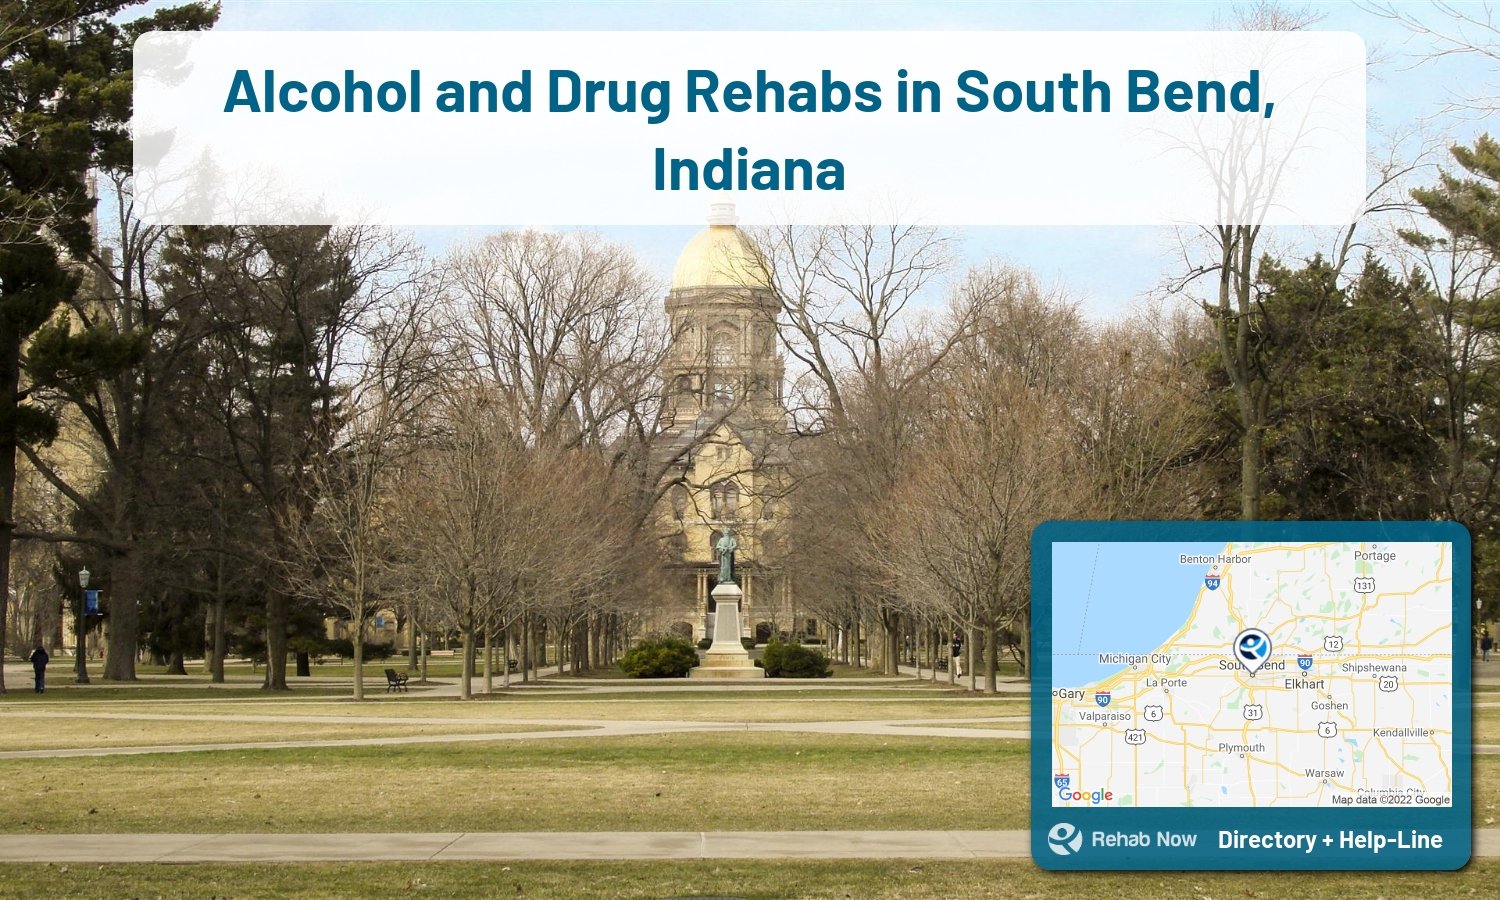 Ready to pick a rehab center in South Bend? Get off alcohol, opiates, and other drugs, by selecting top drug rehab centers in Indiana